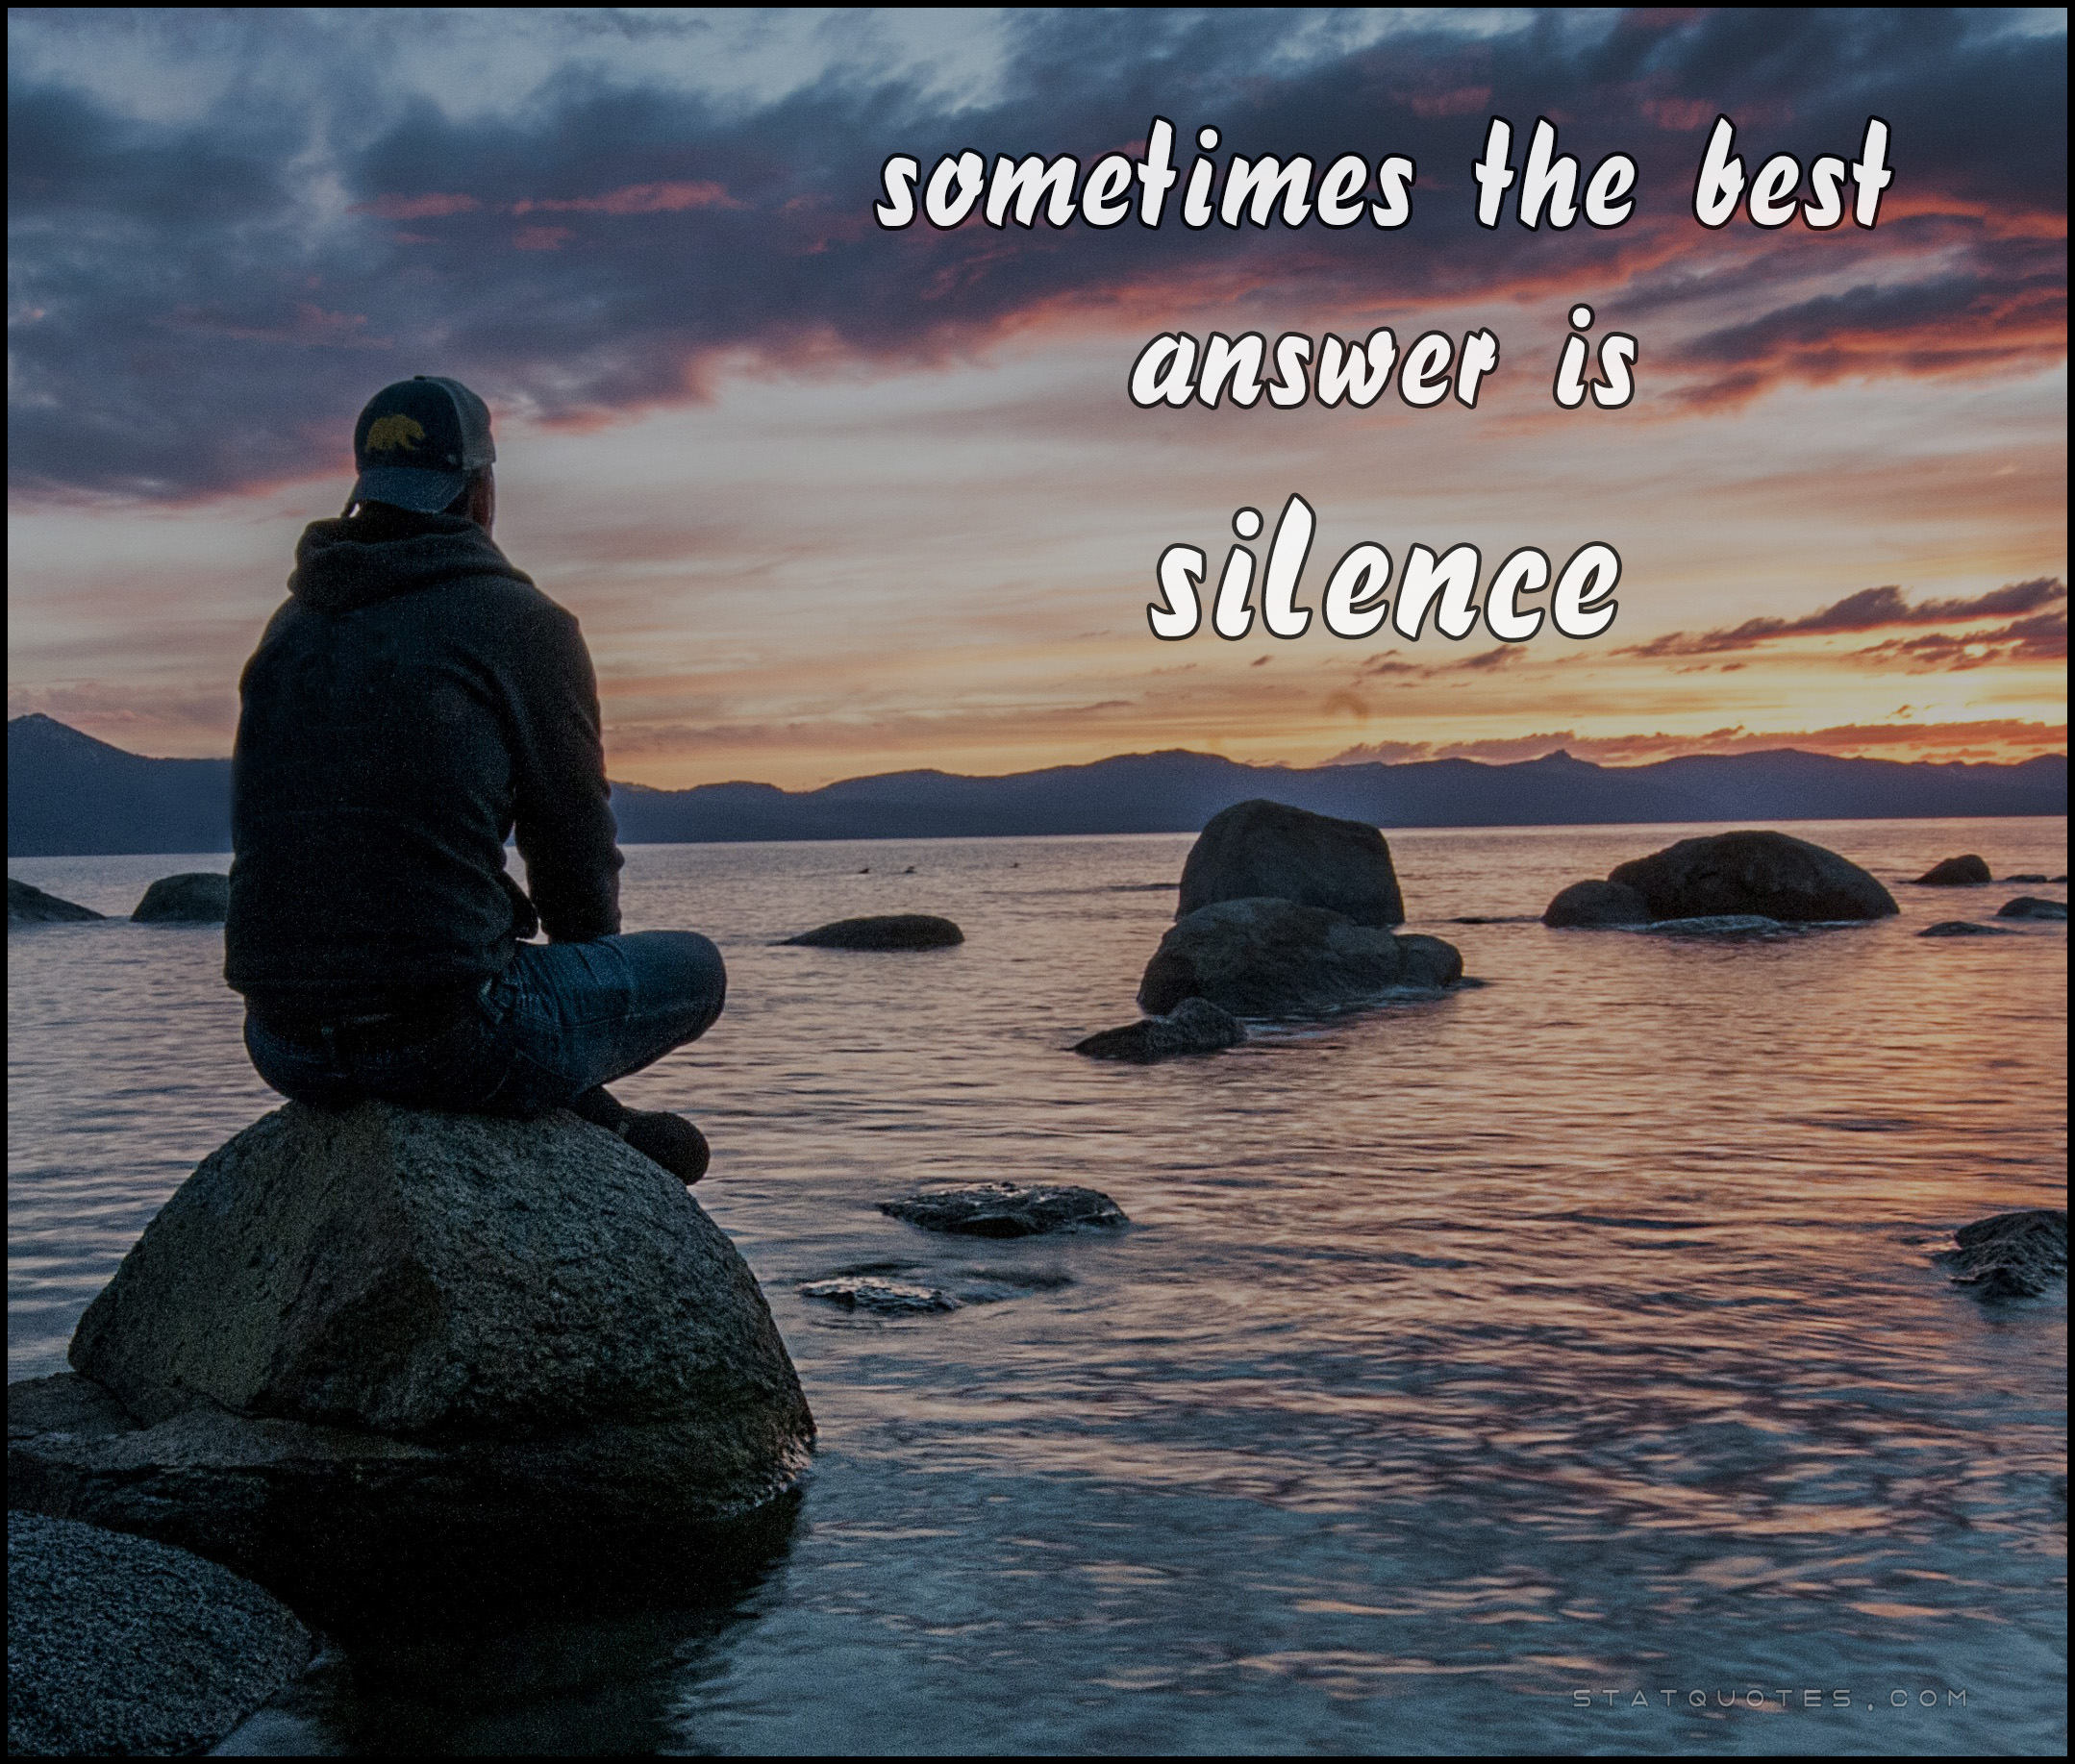 silence is the best answer quote image